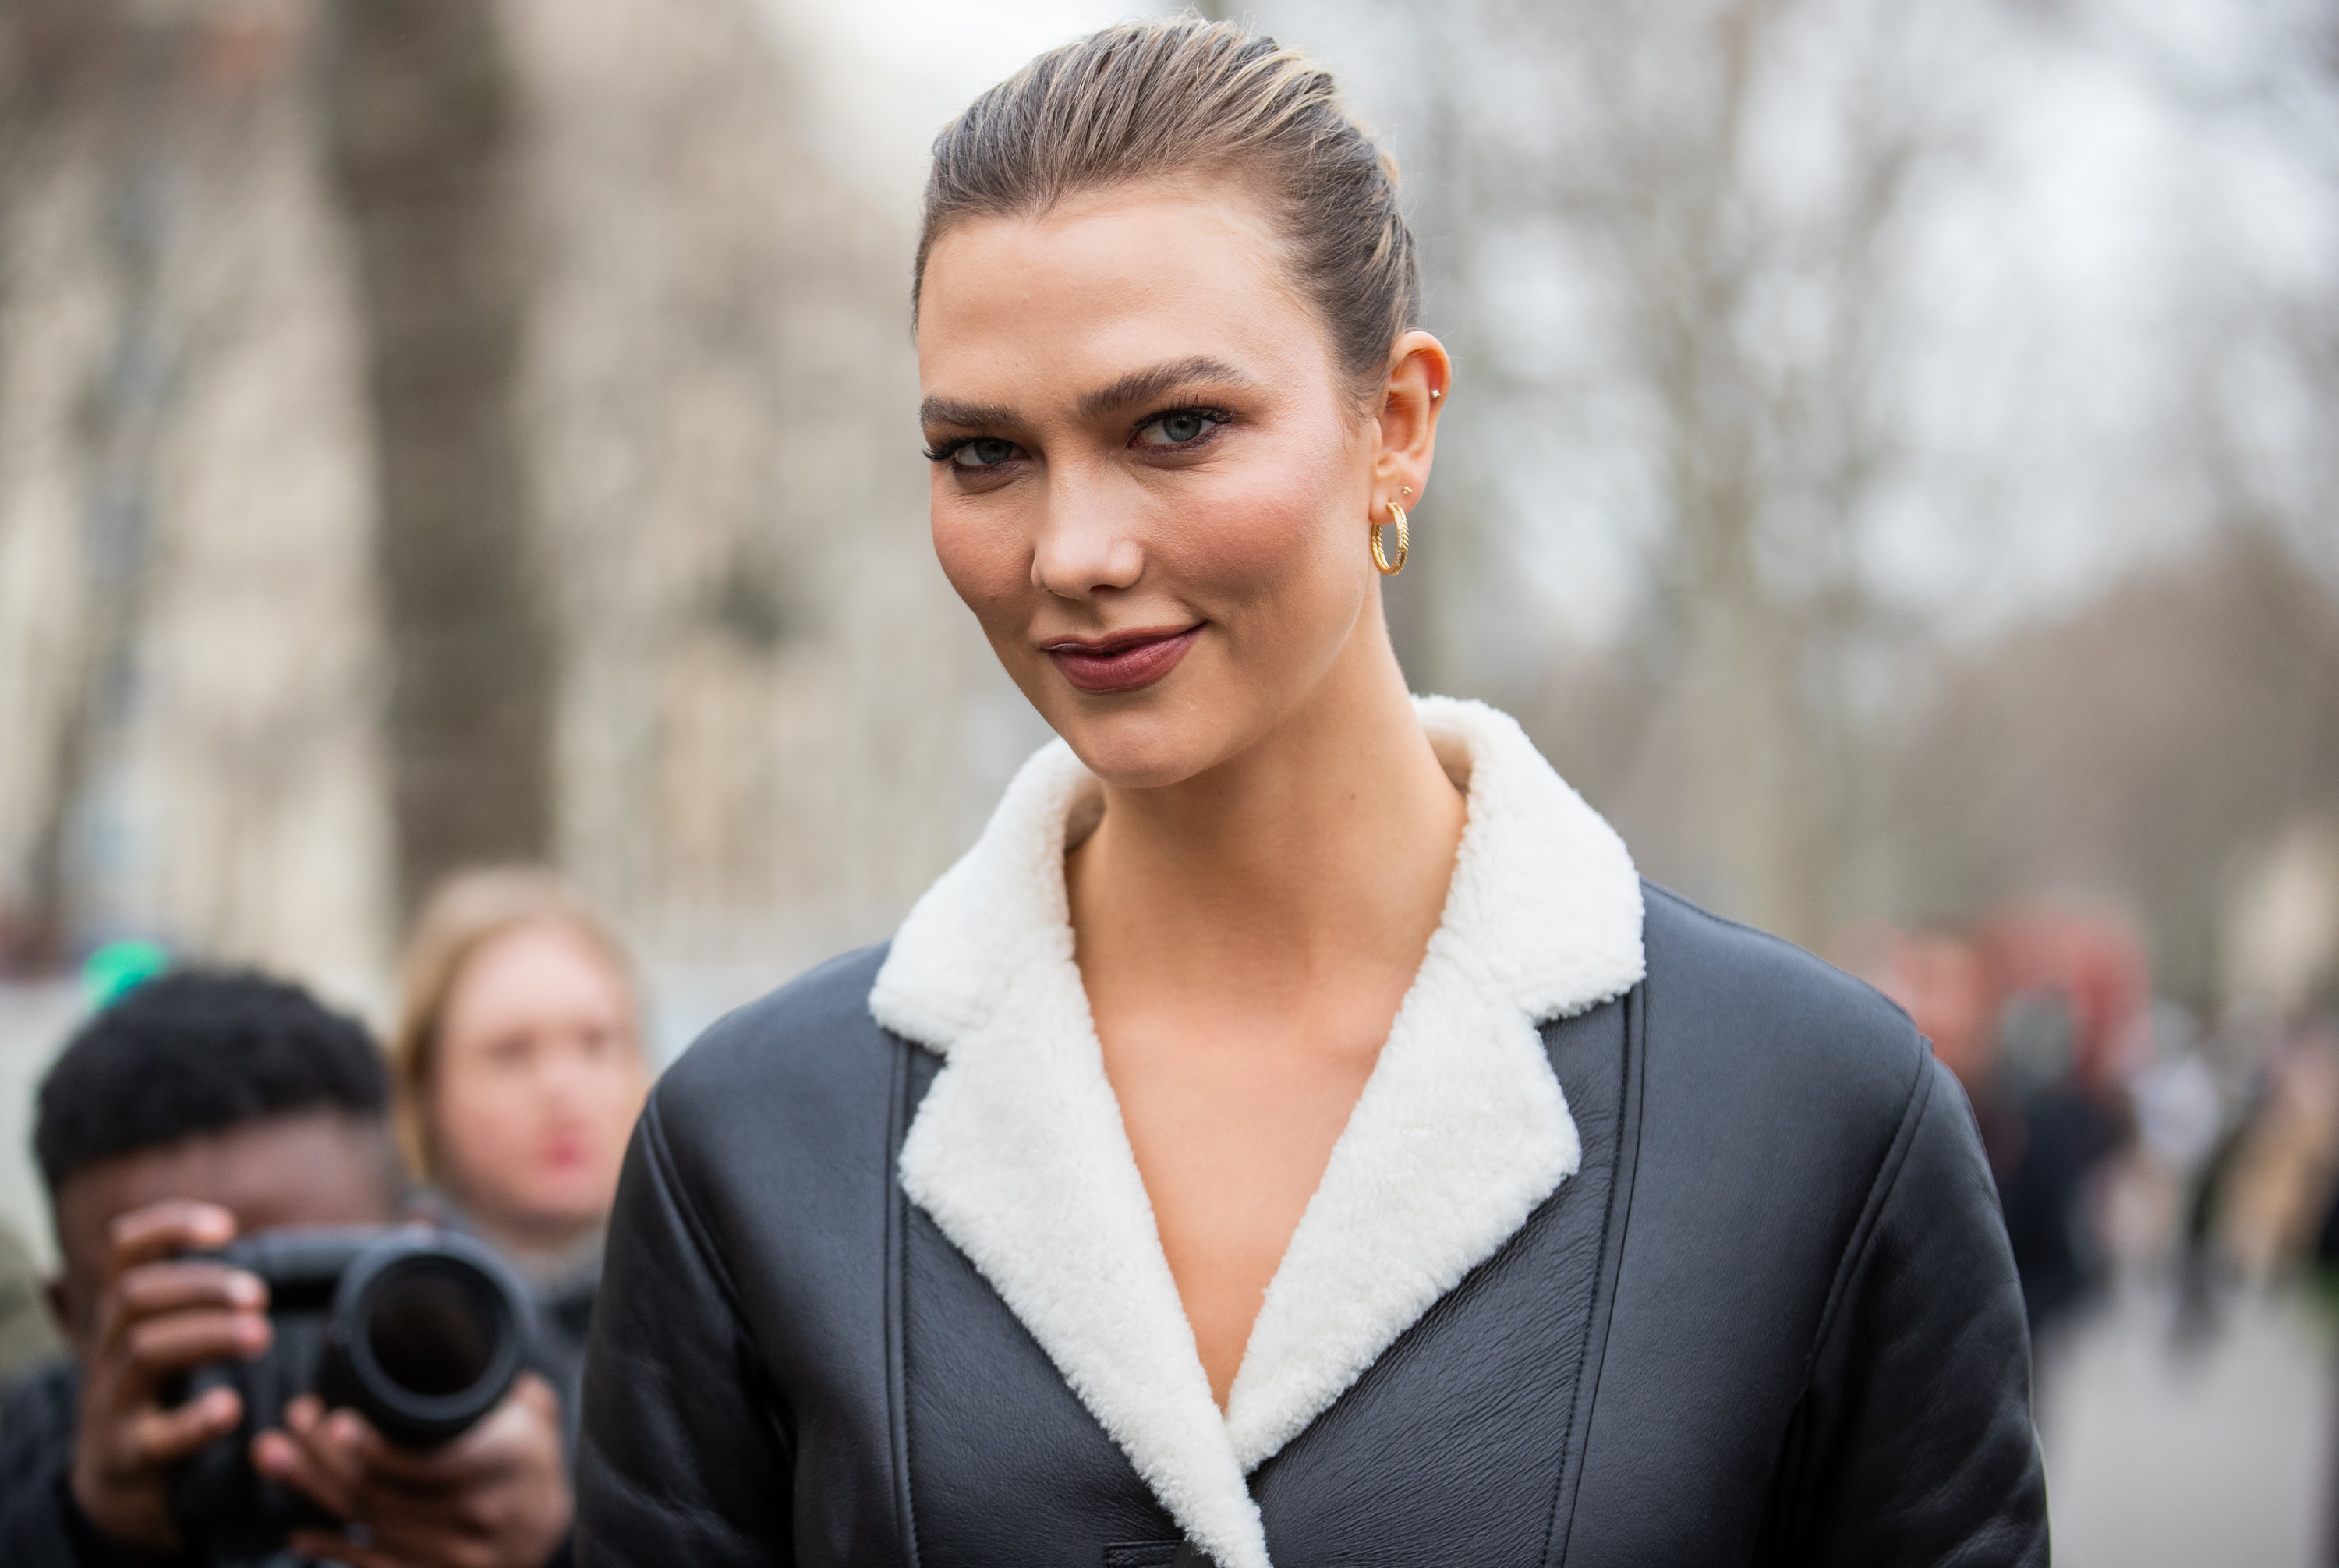 Karlie Kloss shows off svelte post-baby body in Estee Lauder campaign  less than TWO MONTHS after arrival of 2nd son with Joshua Kushner